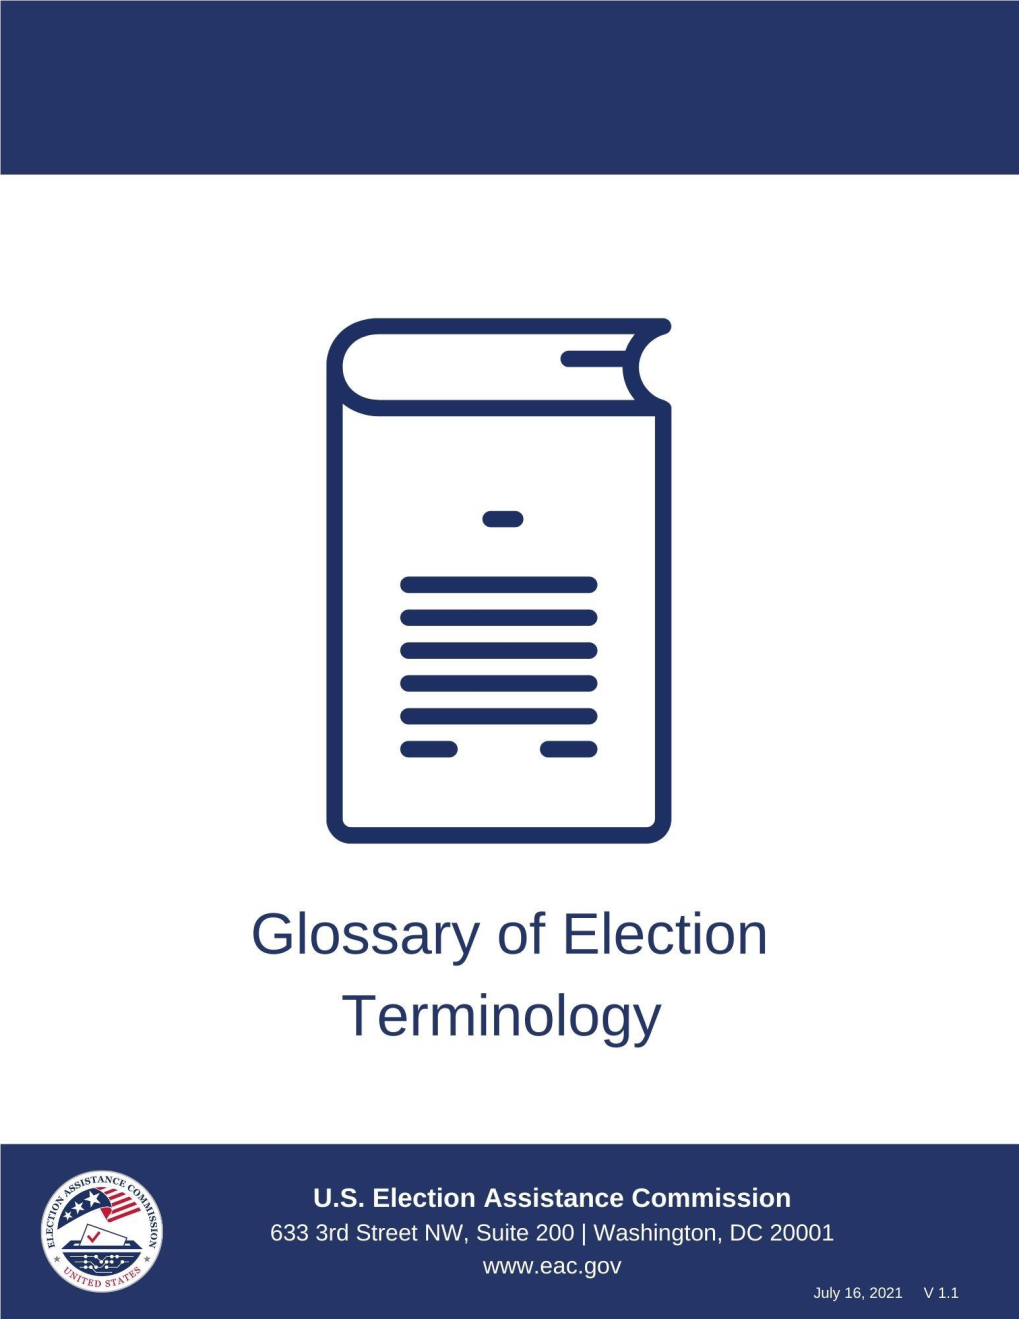 Glossary of Election Terms